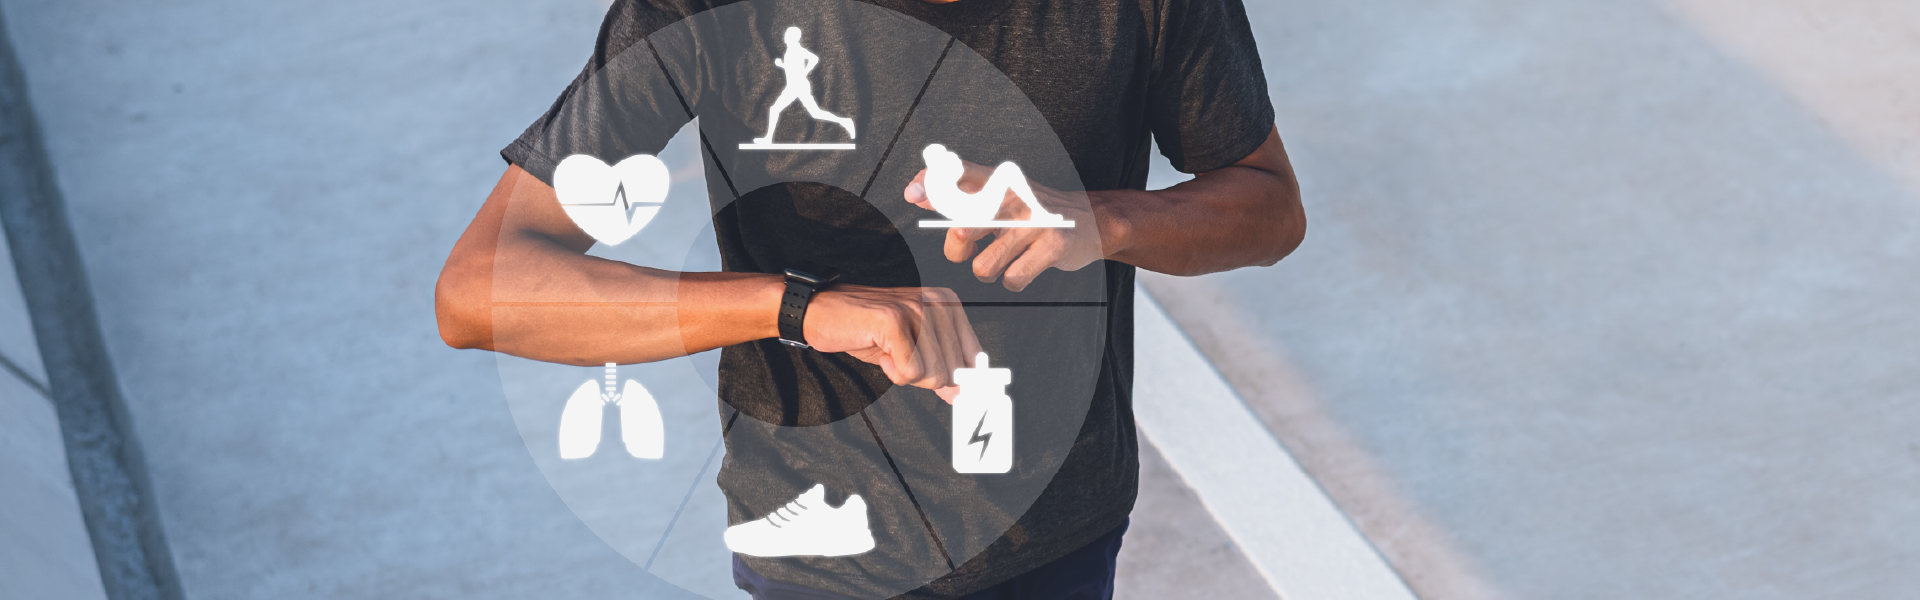 5 Gadgets to Step Up Your Fitness Game